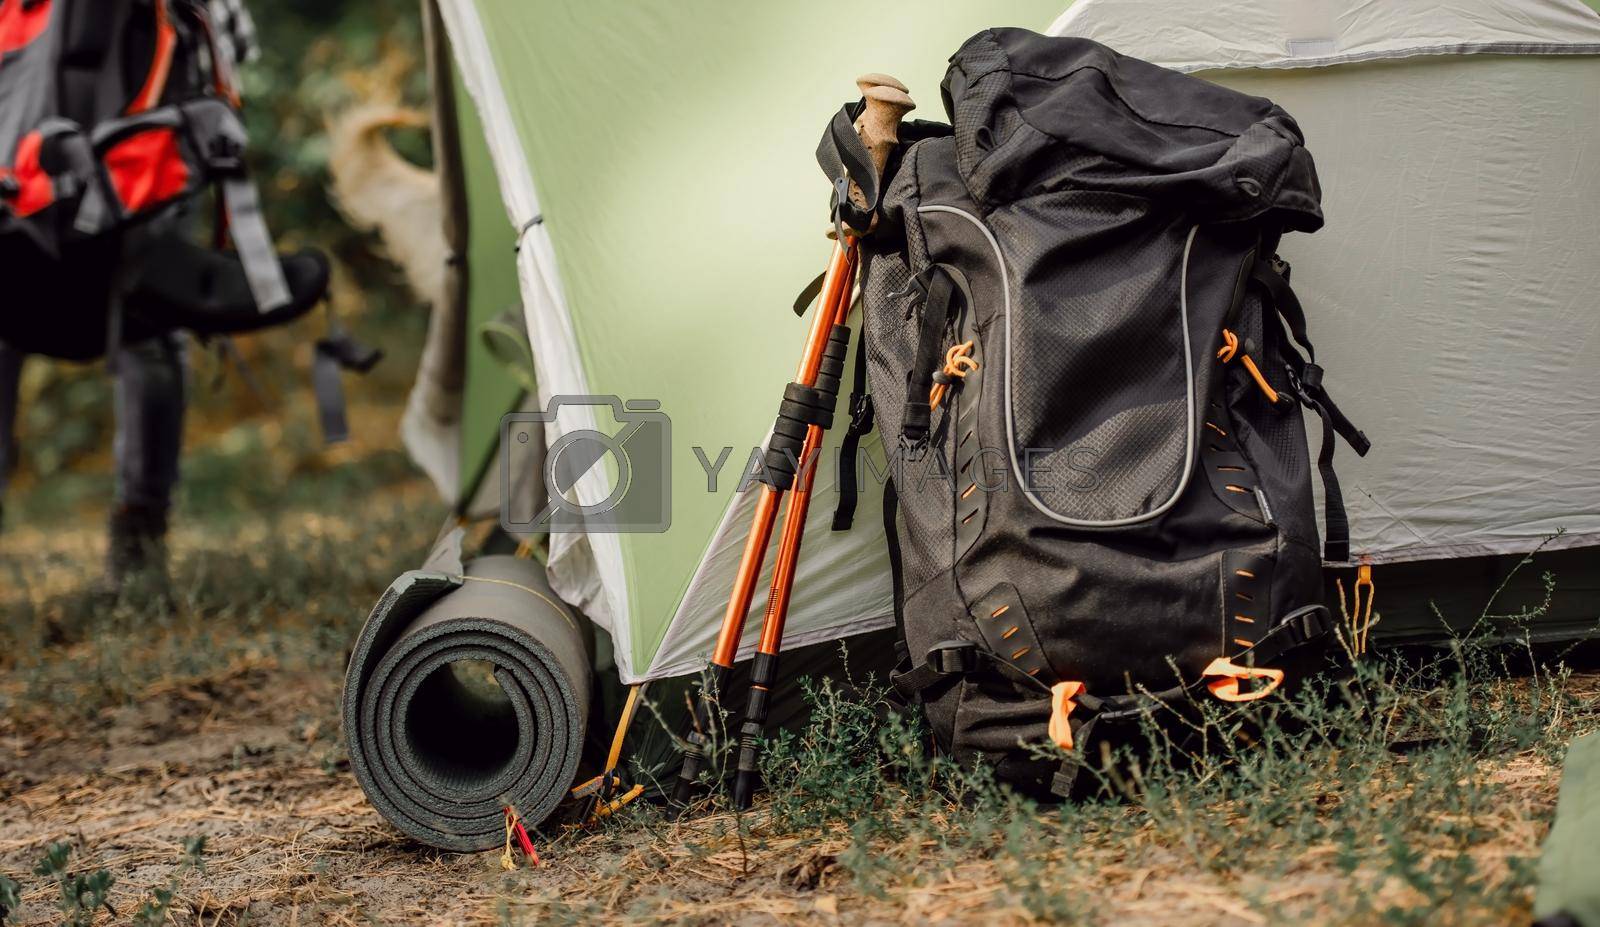 Black backppack and karemat close to tent in camping place in the forest. View on travel touristic hiking equipment outdoor